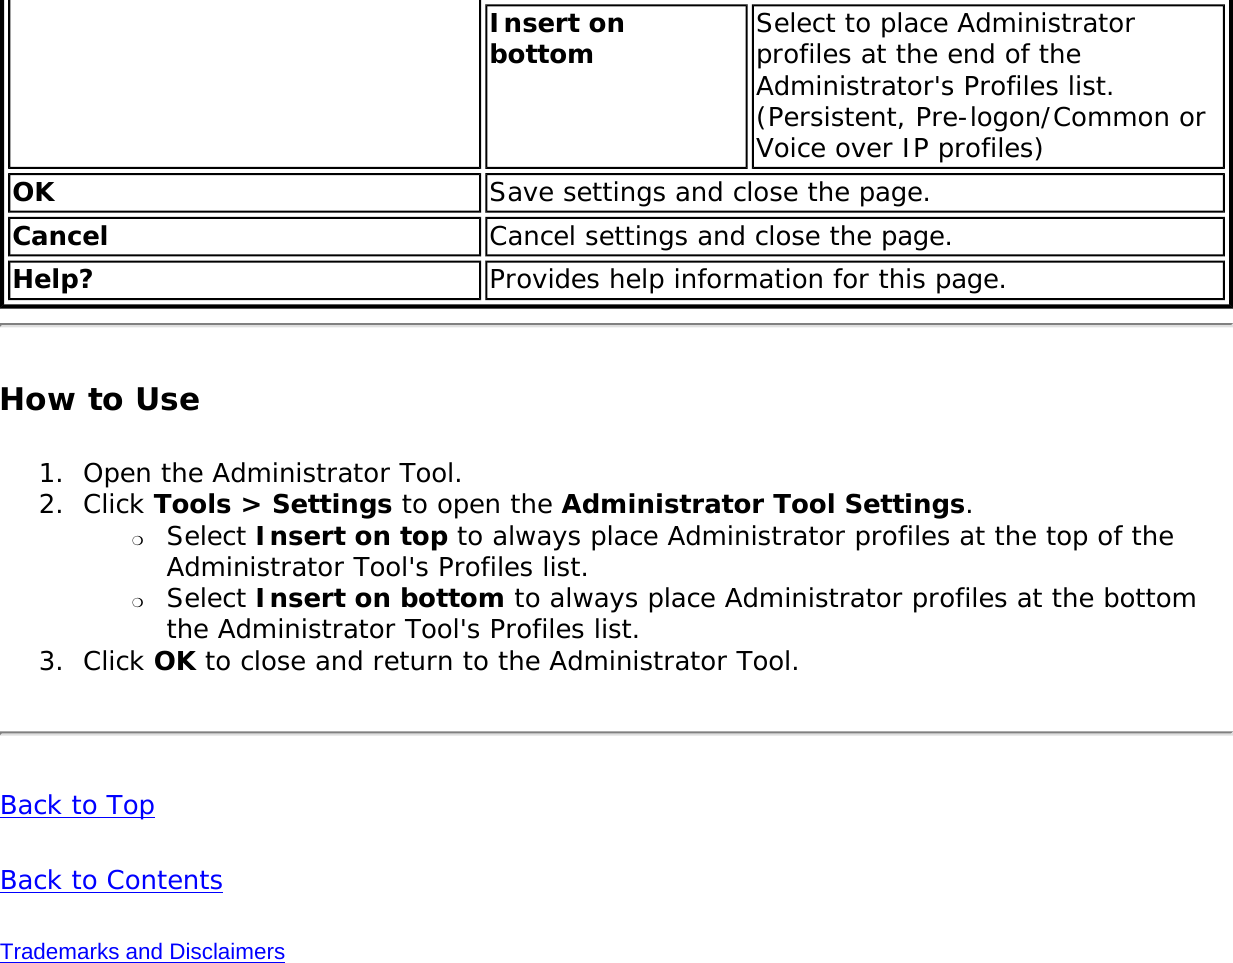 Insert on bottom  Select to place Administrator profiles at the end of the Administrator&apos;s Profiles list. (Persistent, Pre-logon/Common or Voice over IP profiles)OK Save settings and close the page.Cancel Cancel settings and close the page.Help? Provides help information for this page.How to Use1.  Open the Administrator Tool.2.  Click Tools &gt; Settings to open the Administrator Tool Settings. ❍     Select Insert on top to always place Administrator profiles at the top of the Administrator Tool&apos;s Profiles list.❍     Select Insert on bottom to always place Administrator profiles at the bottom the Administrator Tool&apos;s Profiles list.3.  Click OK to close and return to the Administrator Tool. Back to TopBack to ContentsTrademarks and Disclaimers